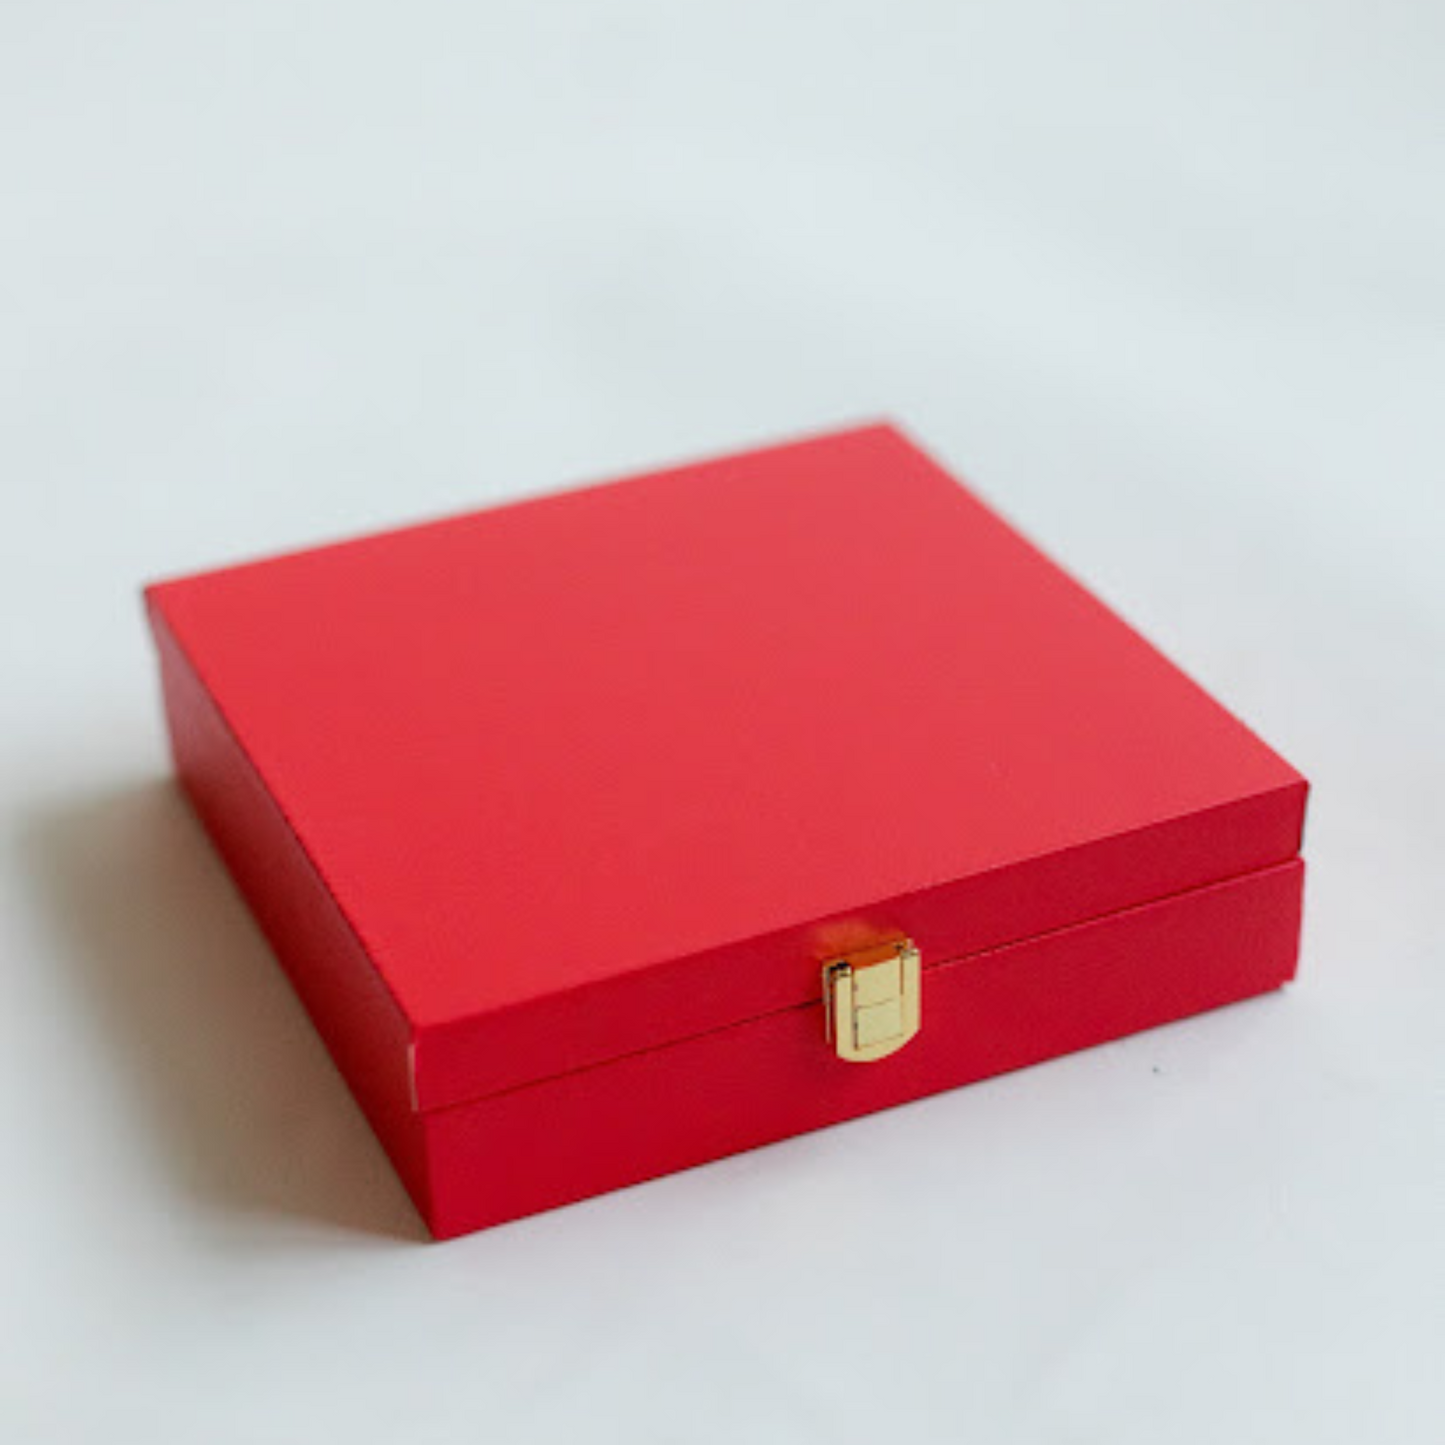 jewellery gift box in red 